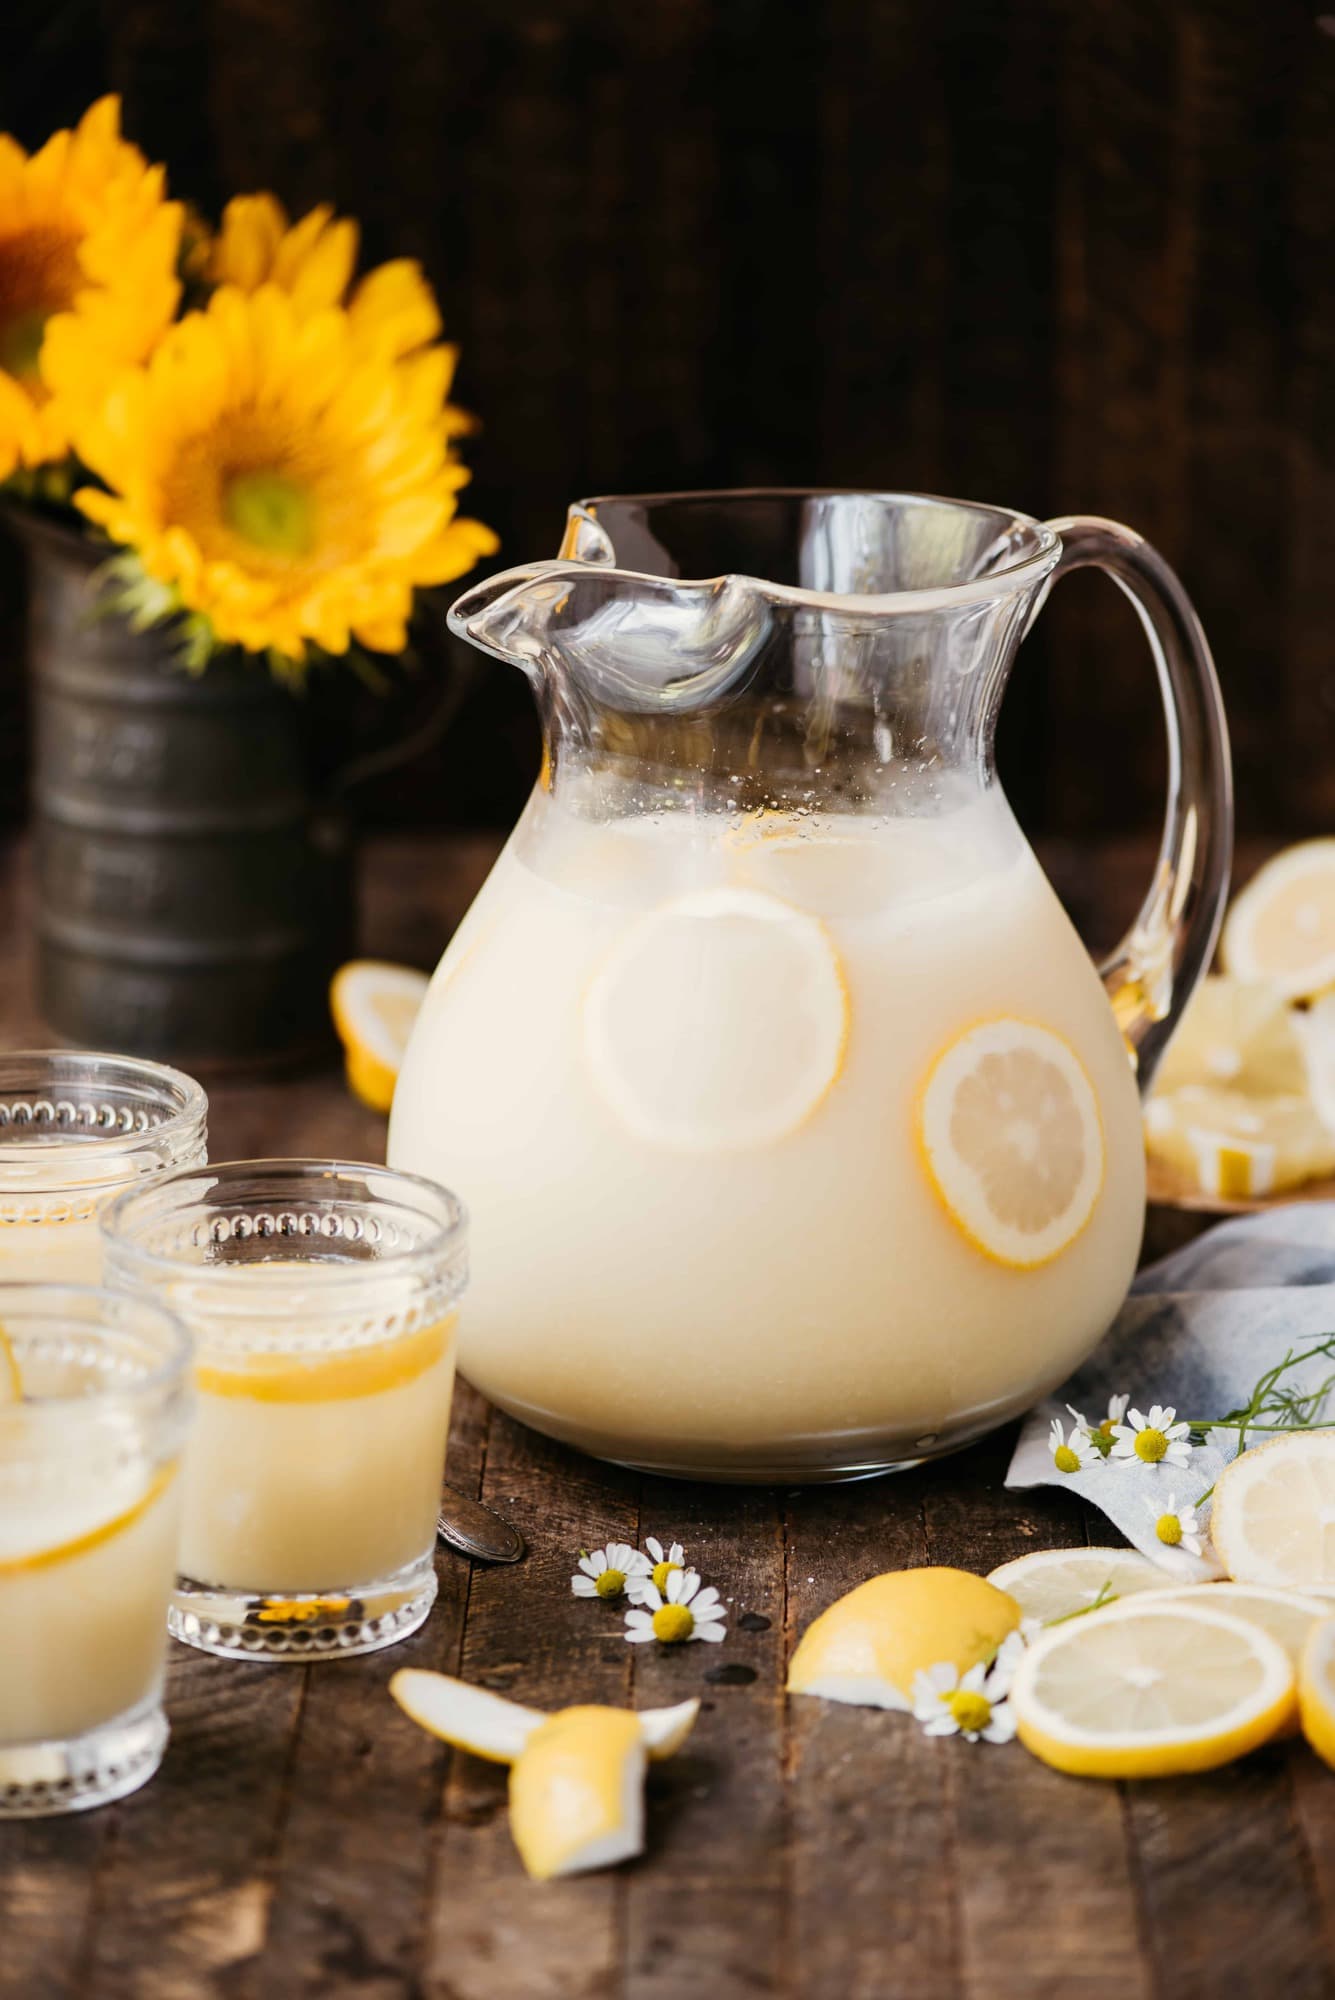 Side view of homemade lemonade in a large vintage pitcher on a wood surface with sunflowers in the background